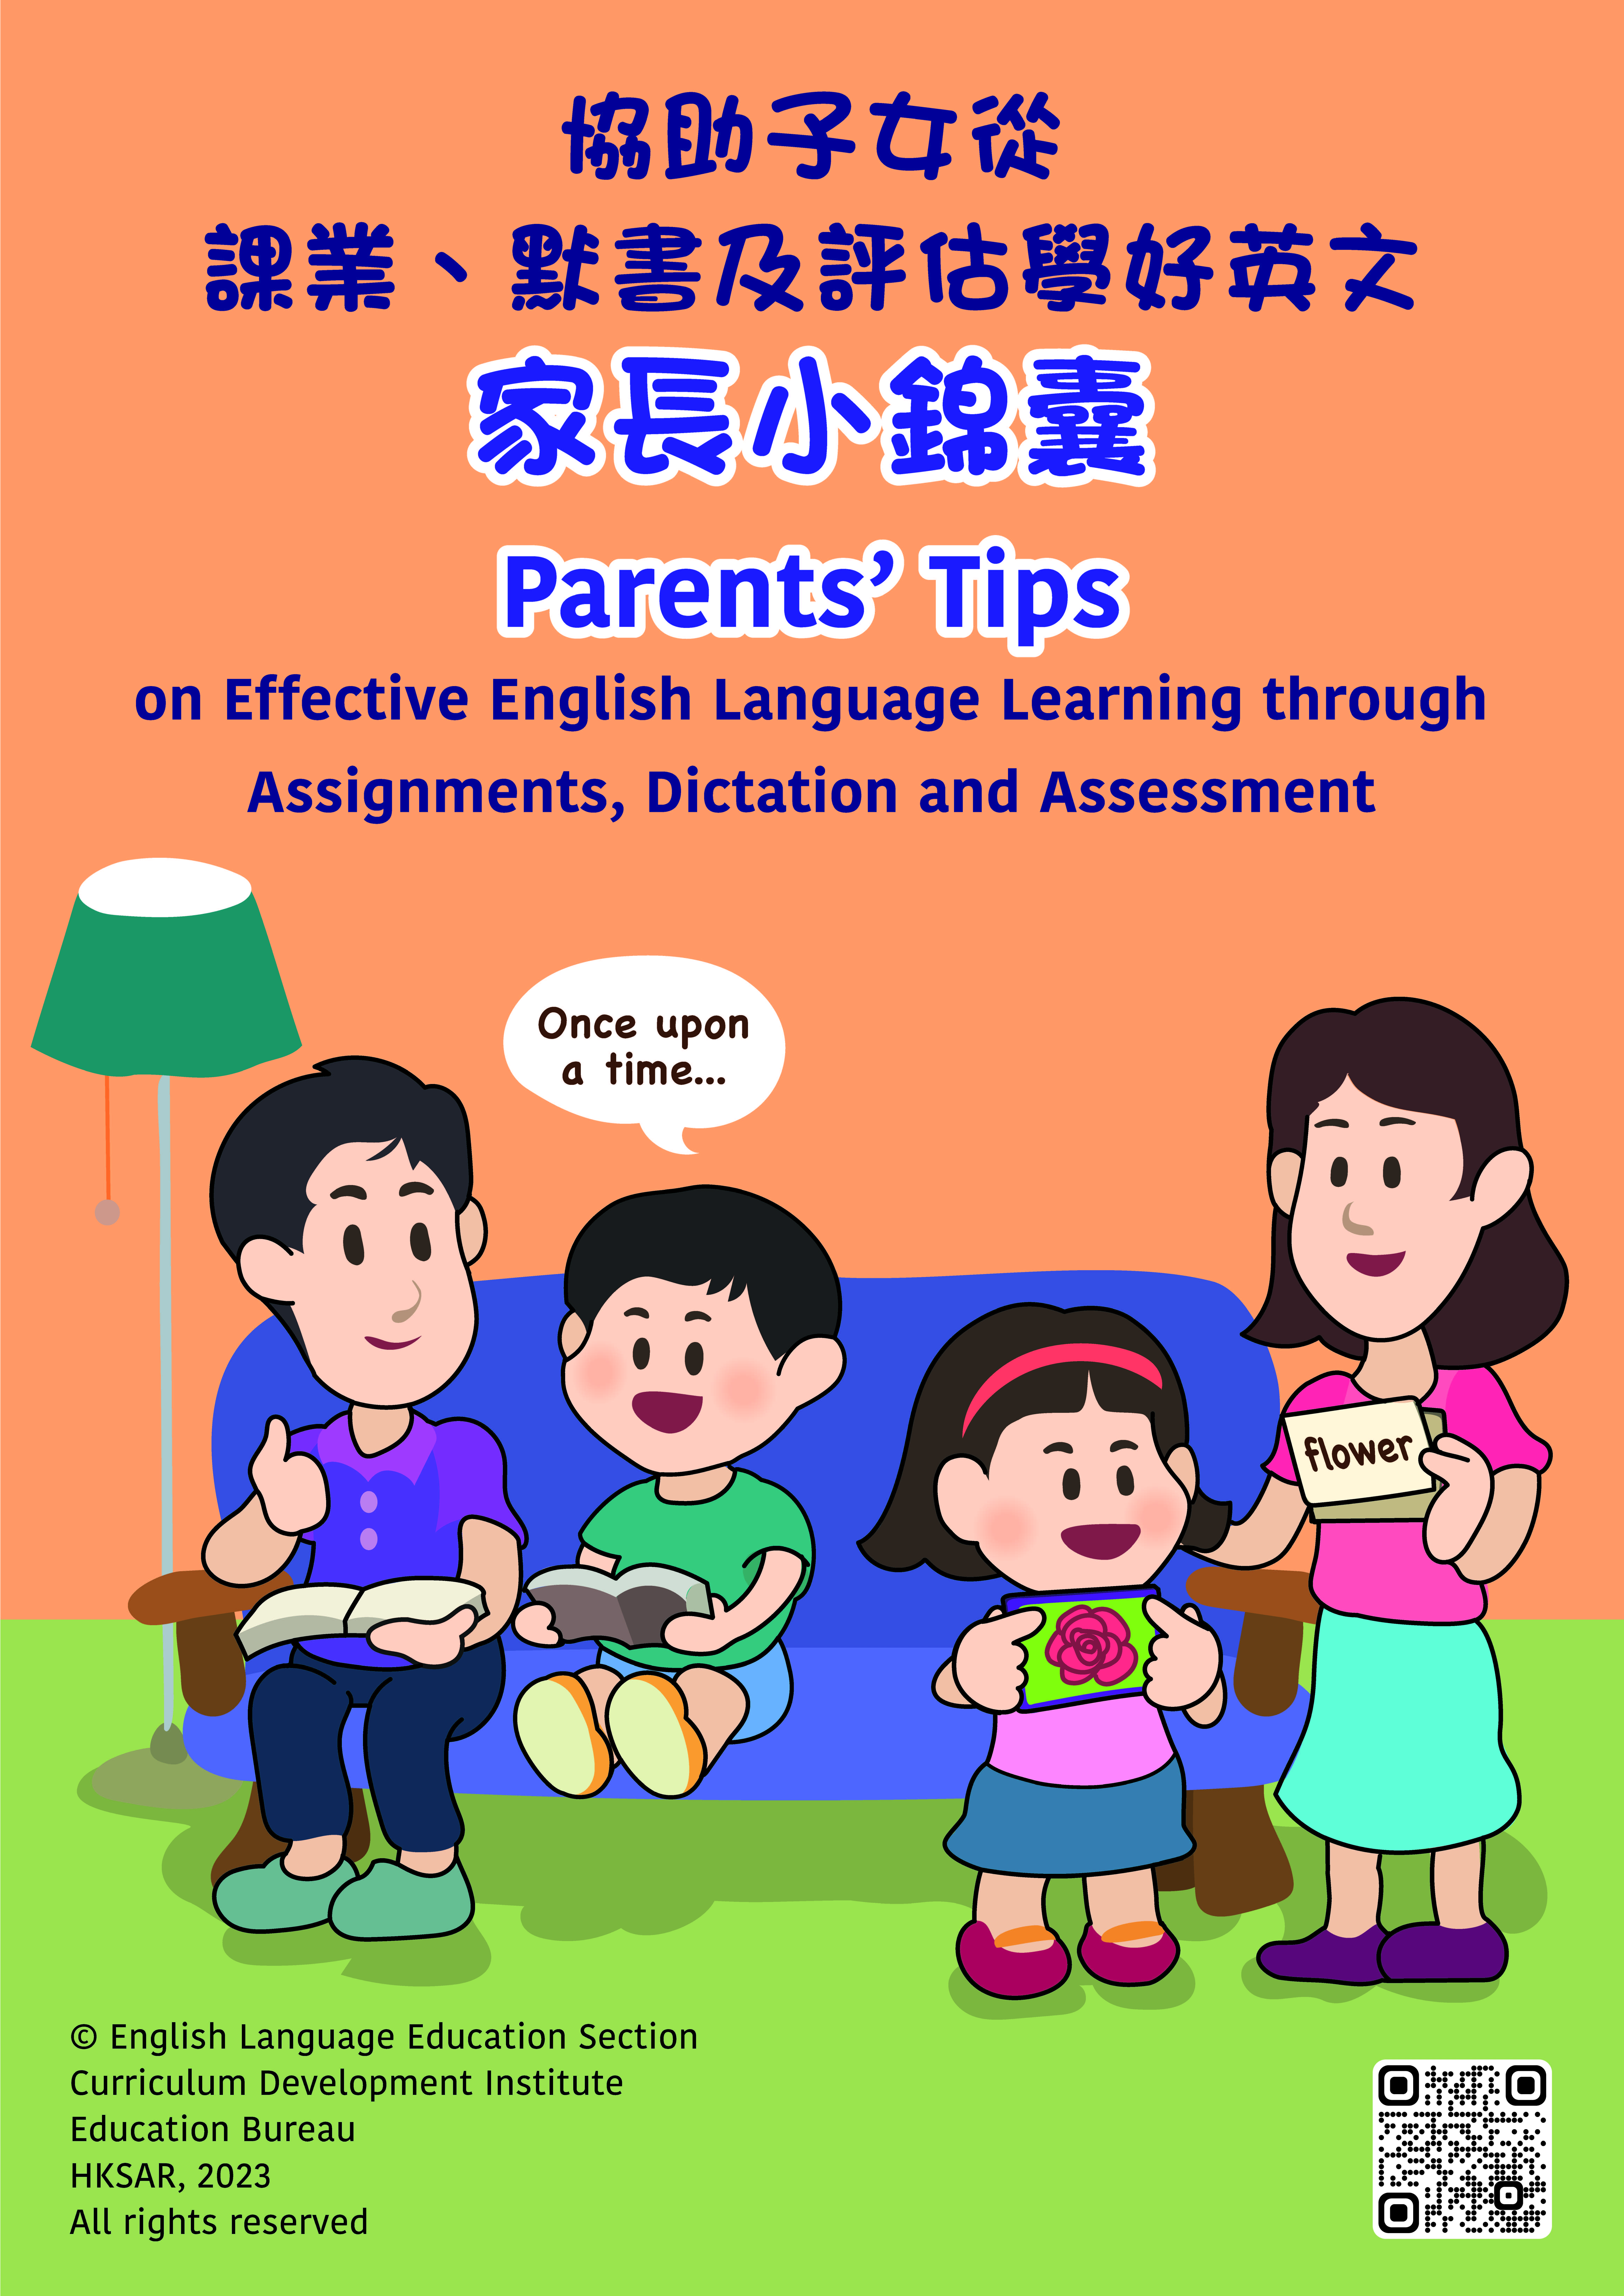 “Parents’ Tips on Effective English Language Learning through  Assignments, Dictation and Assessment”